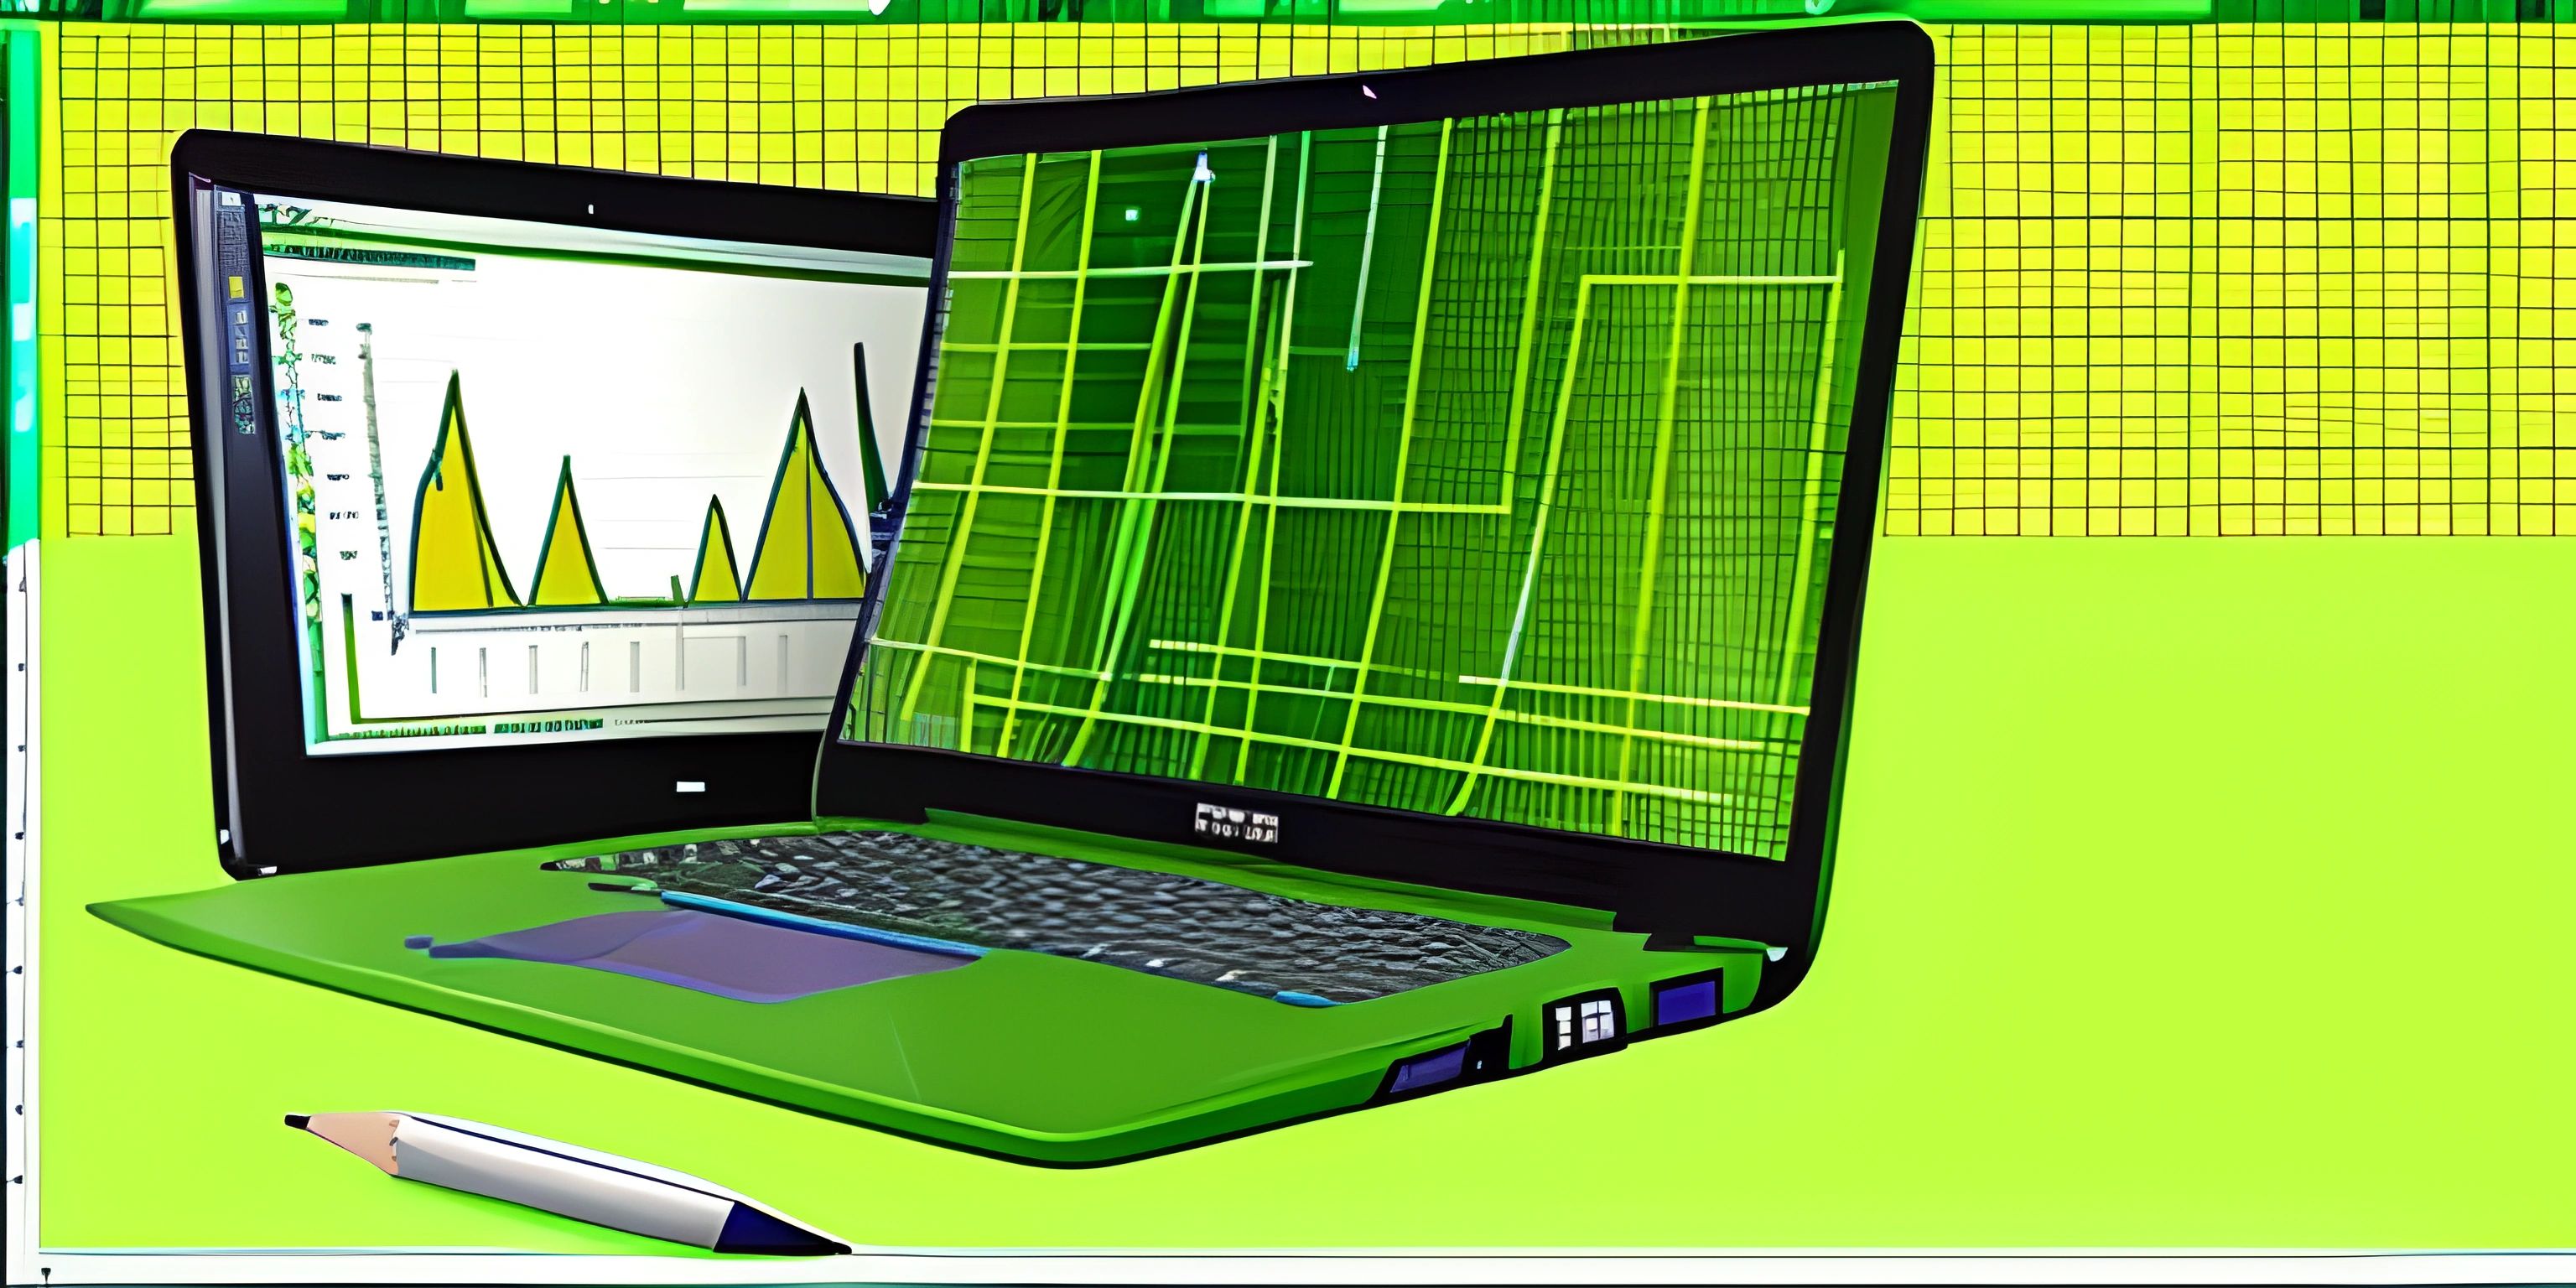 a laptop computer screen displaying a green screen with diagrams of different components on it and the screen shows the area between which a pen can be drawn